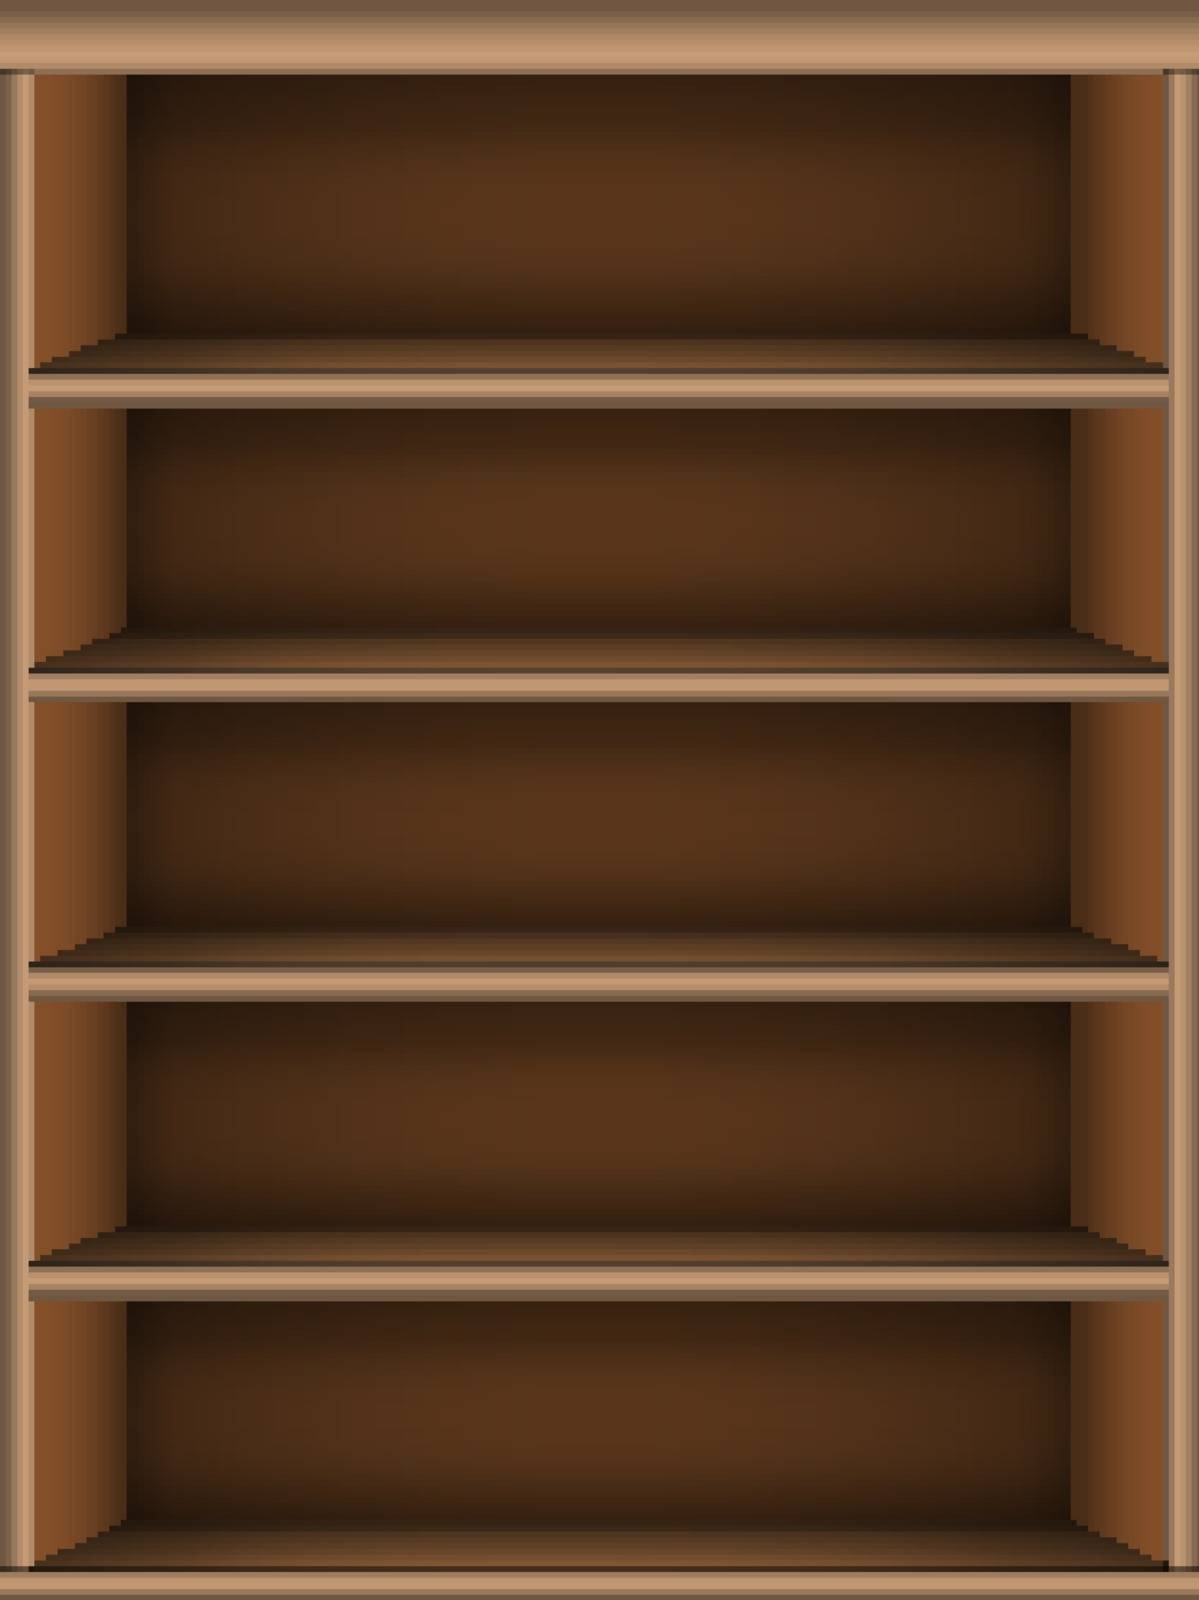 Bookshelf virtual library. Vector online media books background. Book store five shelves template. Phone screen size. Isolated graphic illustration. Book shelf